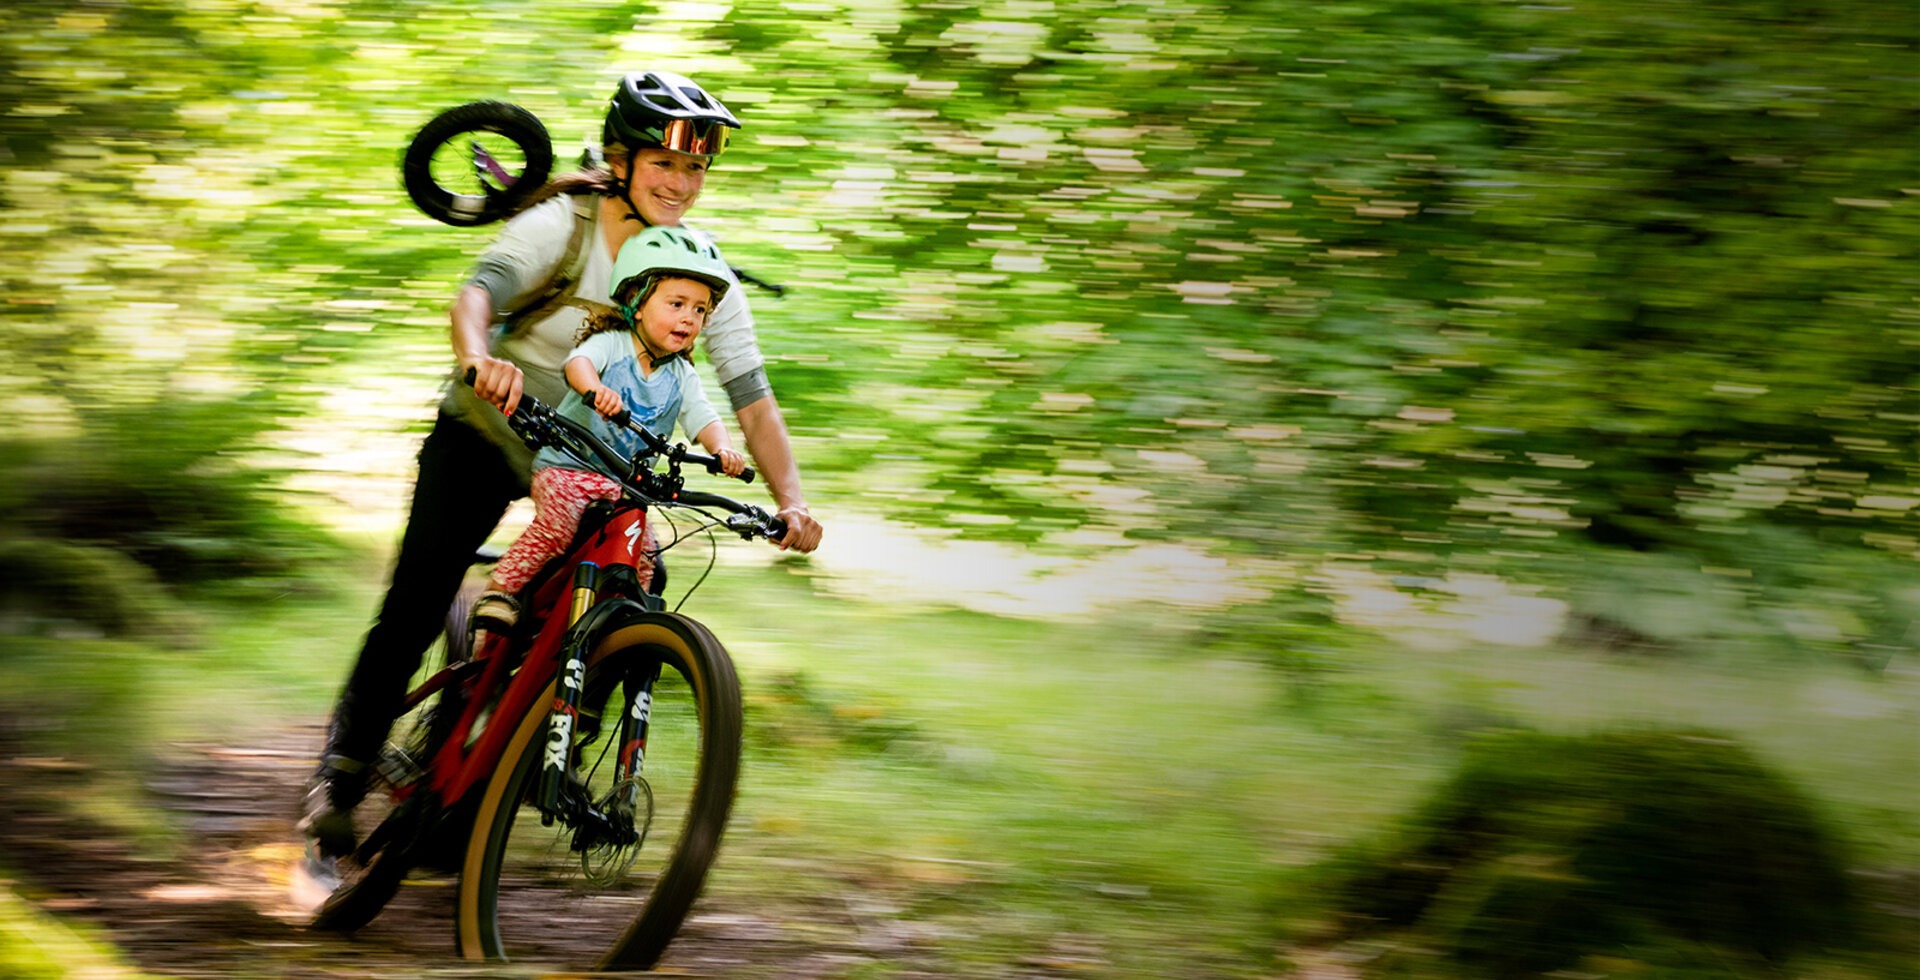 Three days before the due date of her second baby, Hannah Barnes and her daughter Inga ride one of their favorite trails.